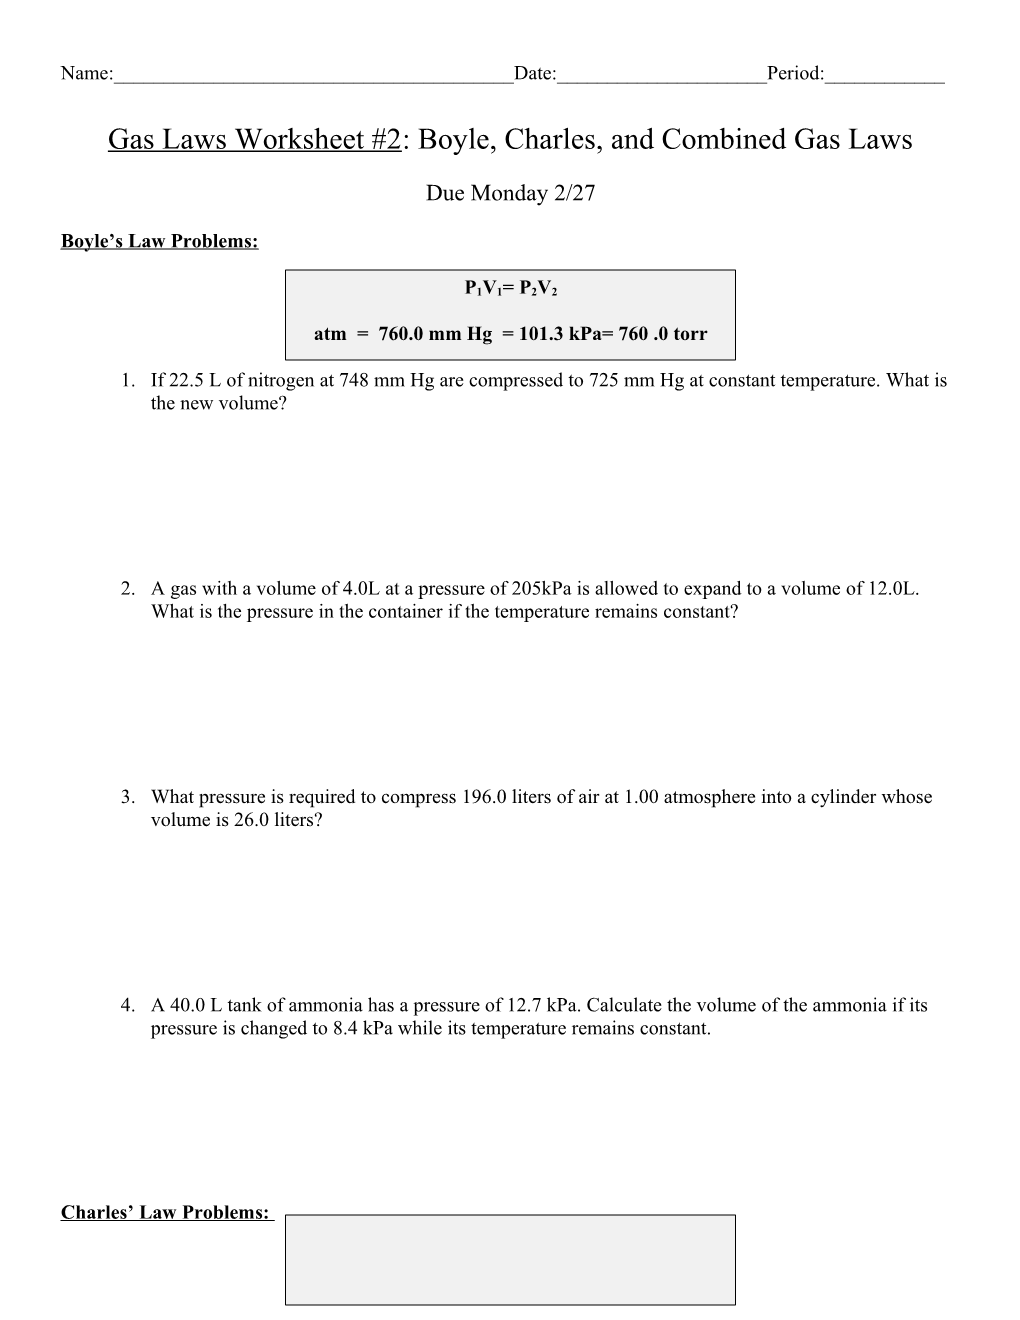 Gas Laws Worksheet #2: Boyle, Charles, and Combined Gas Laws s1